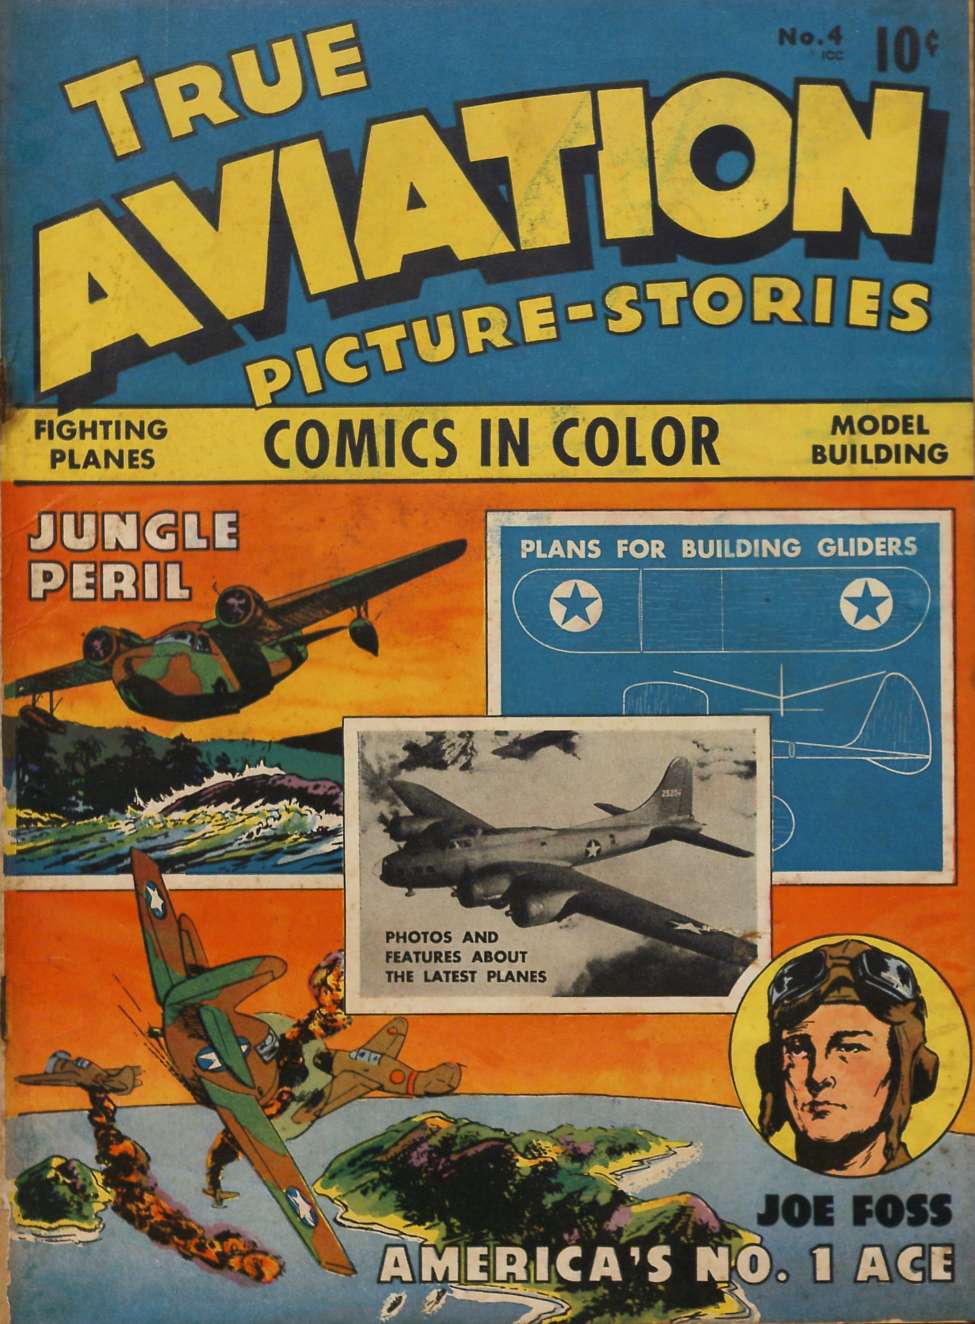 Book Cover For True Aviation Picture Stories 4